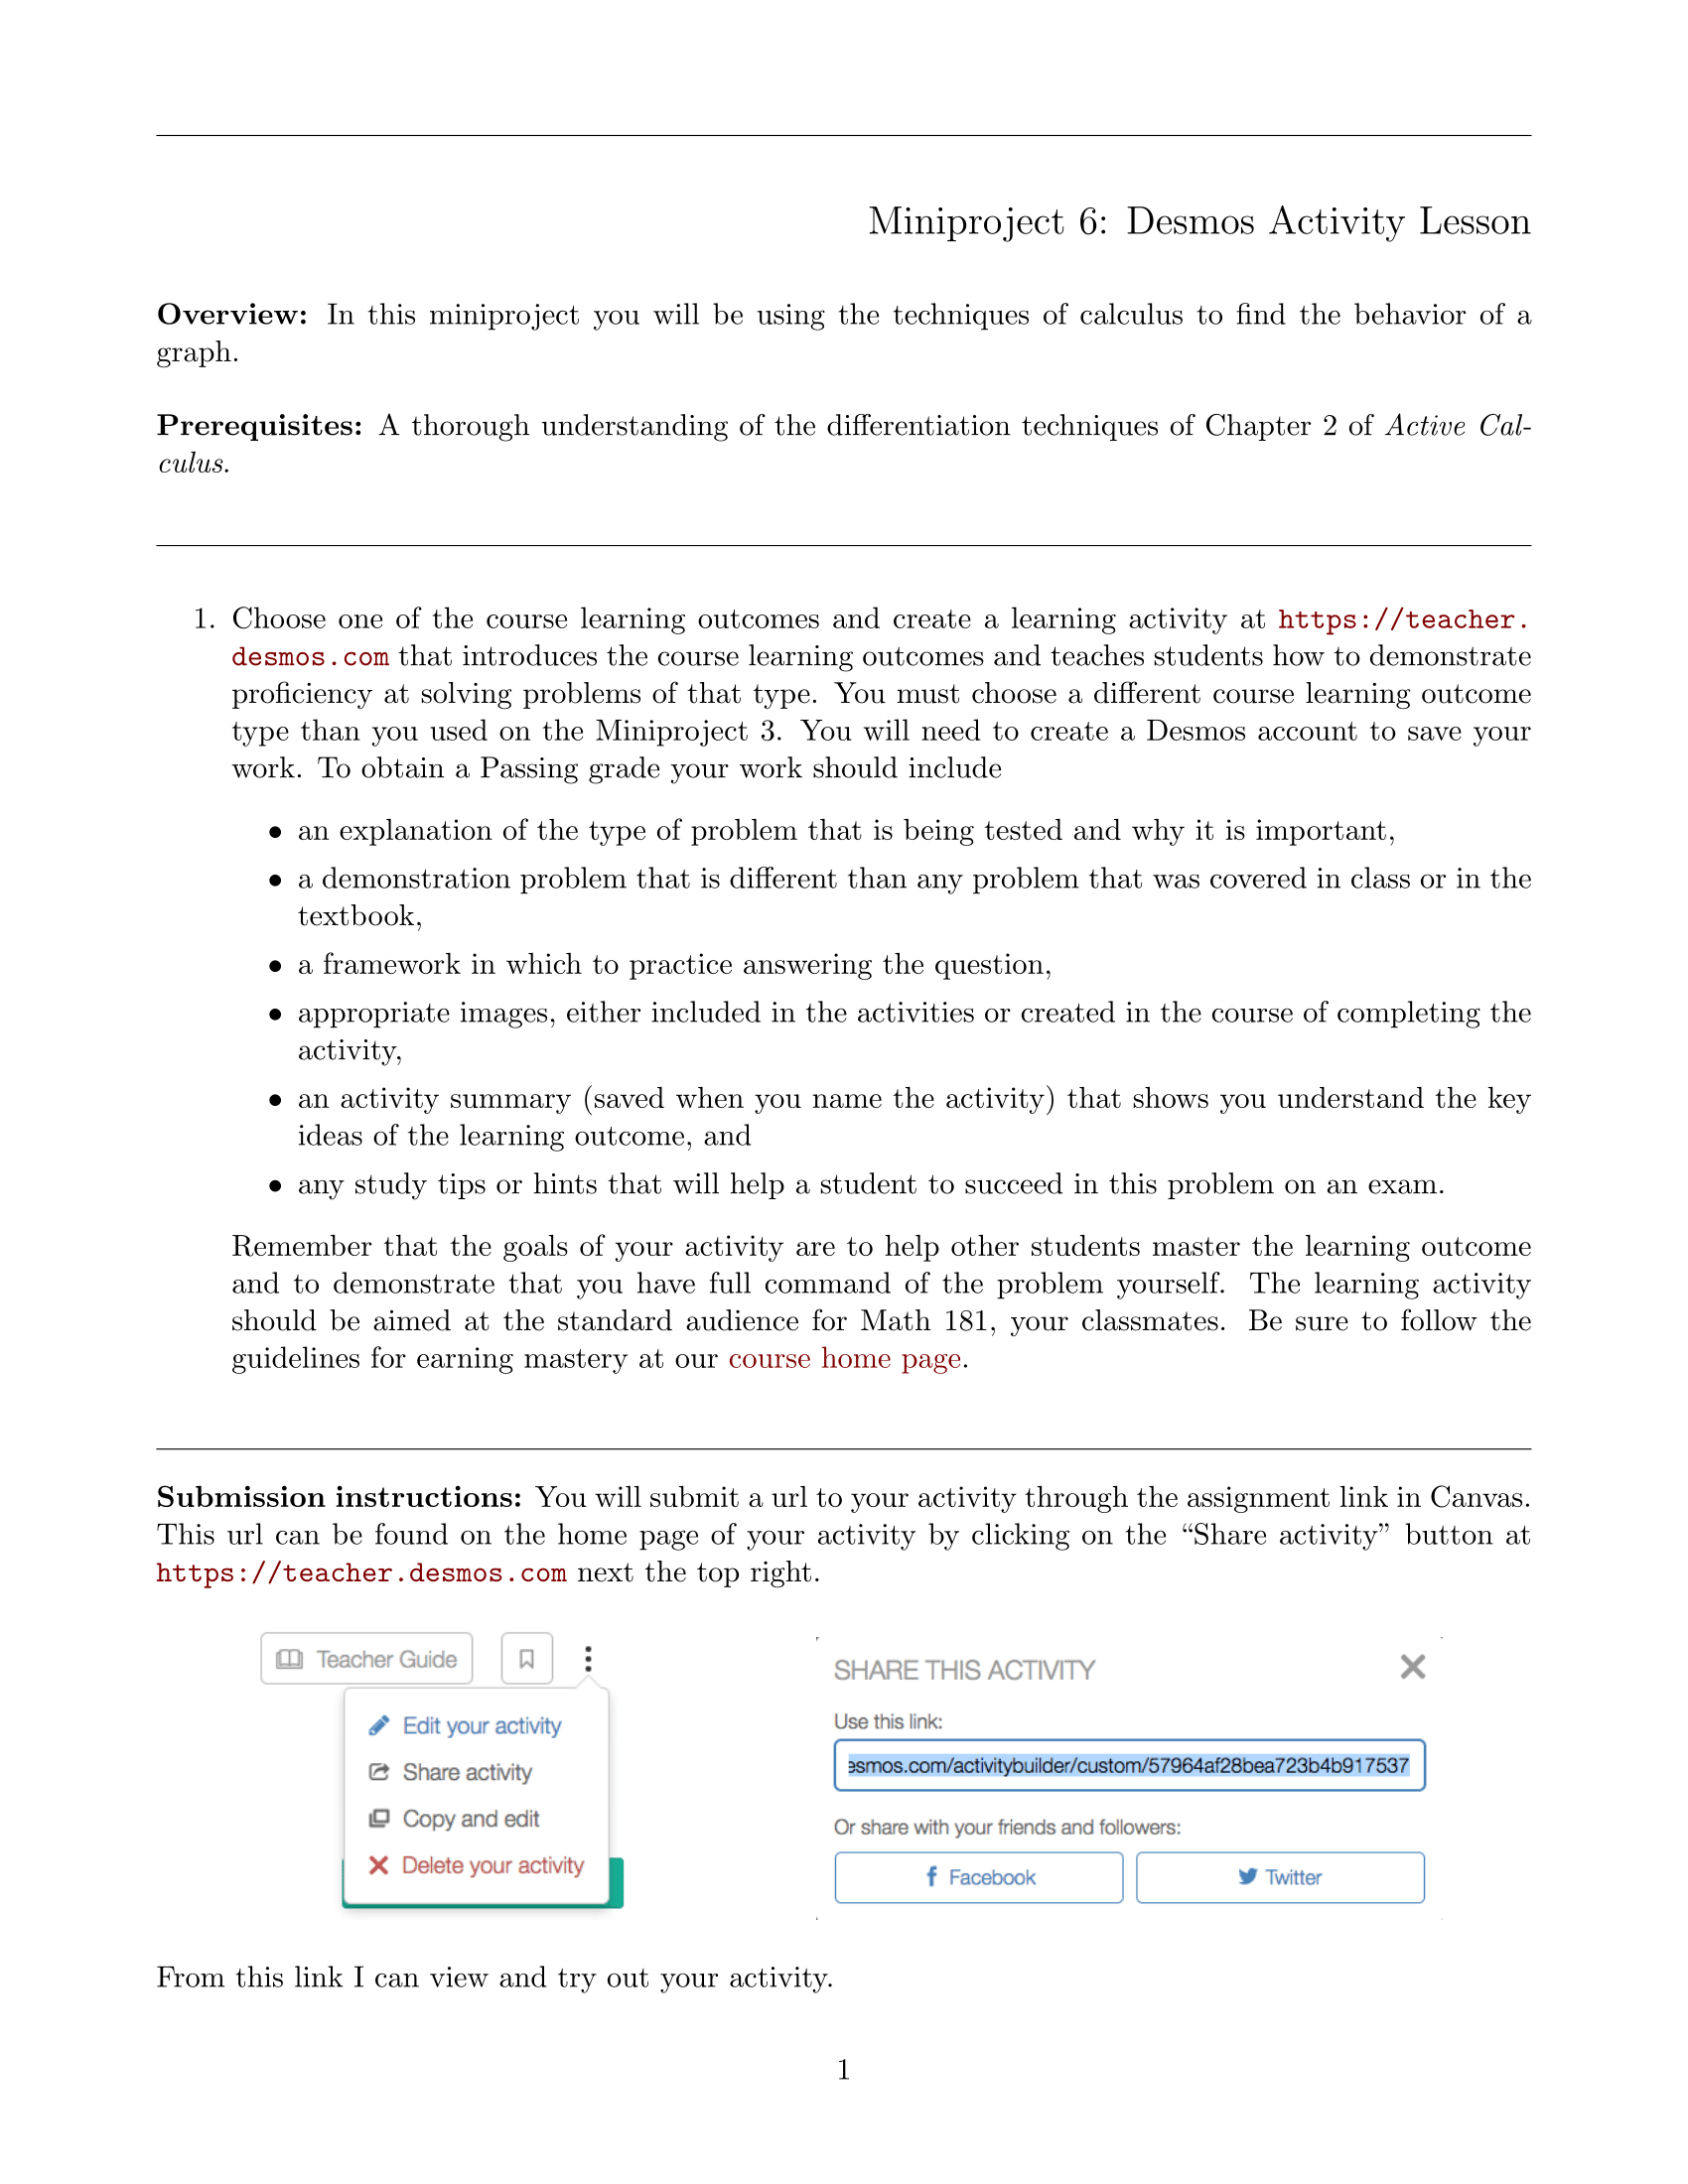 Instructions on how to complete a project involving creating a Desmos teaching activity.